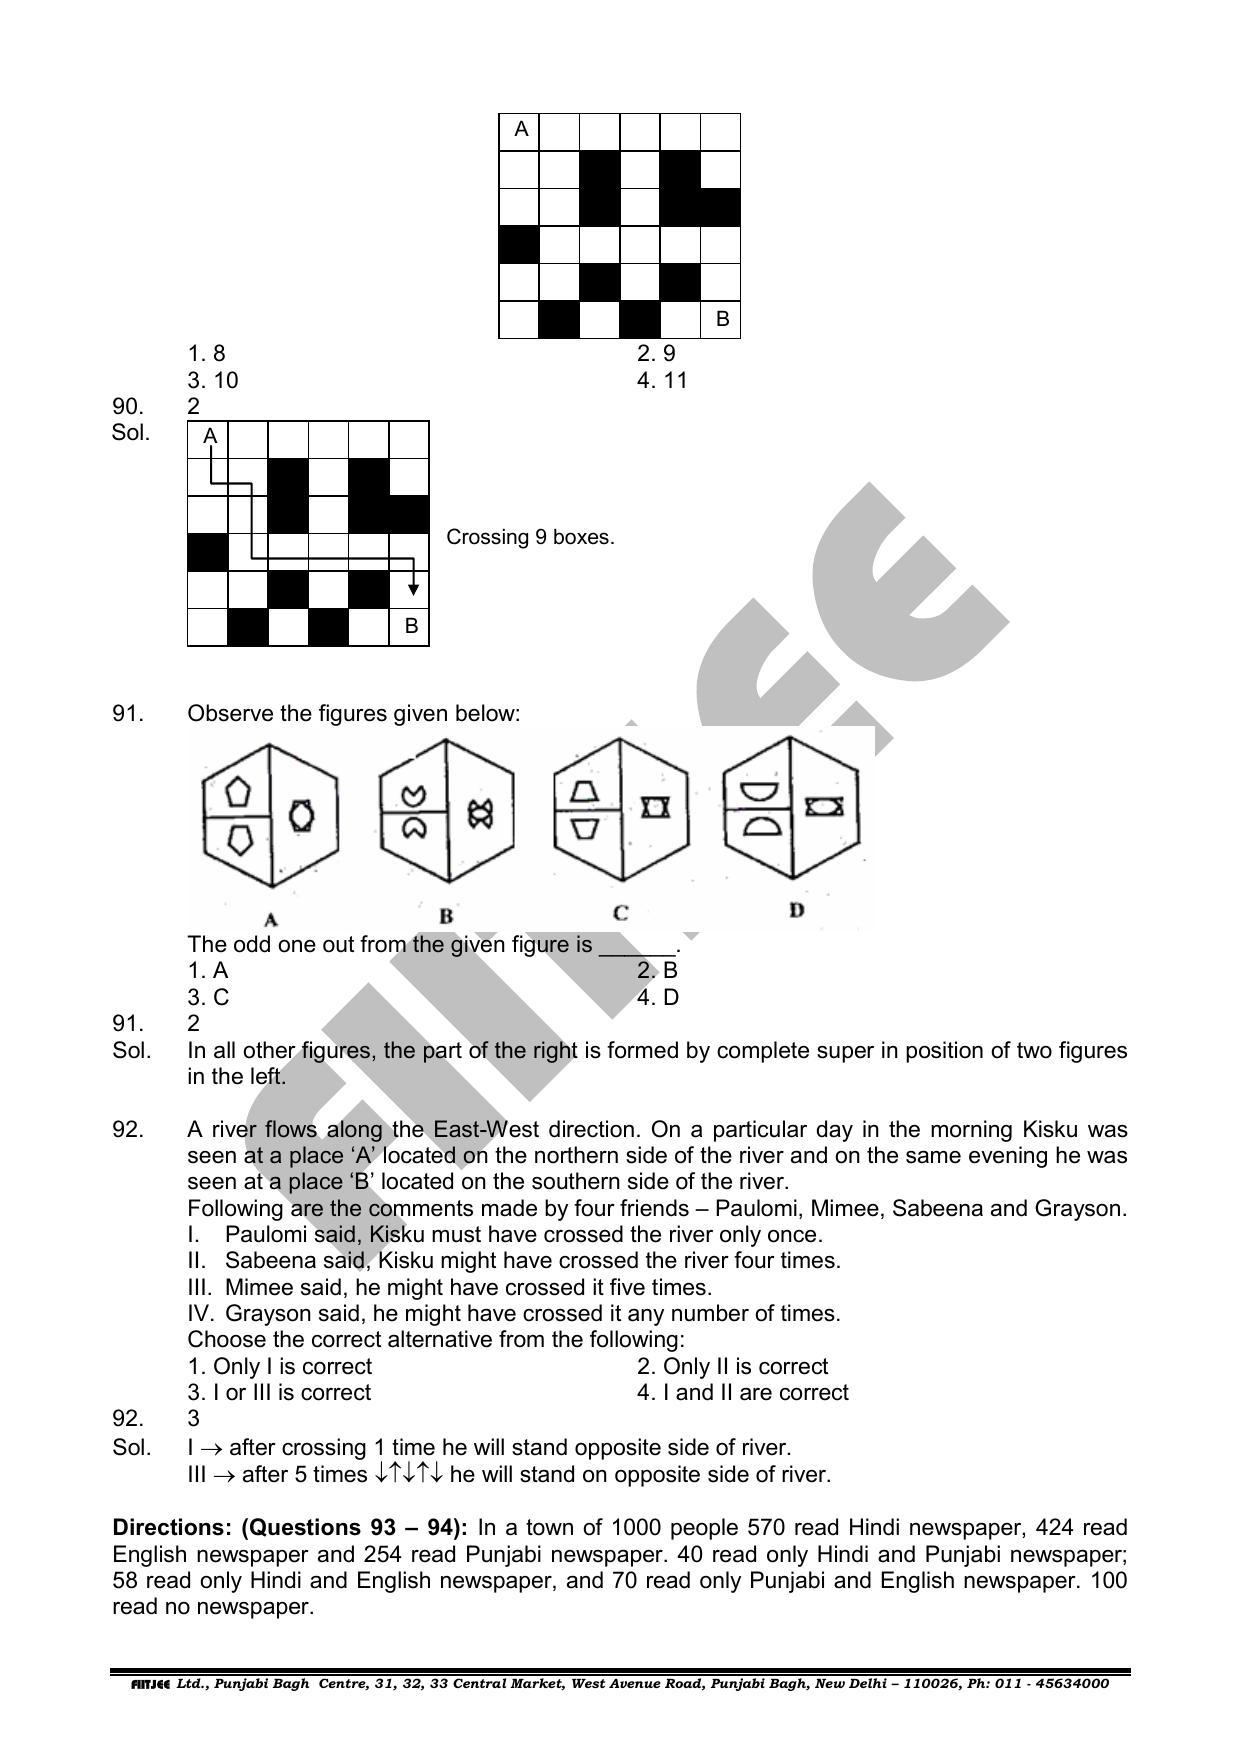 NTSE 2019 (Stage II) MAT Question Paper with Solution (June 16, 2019) - Page 29